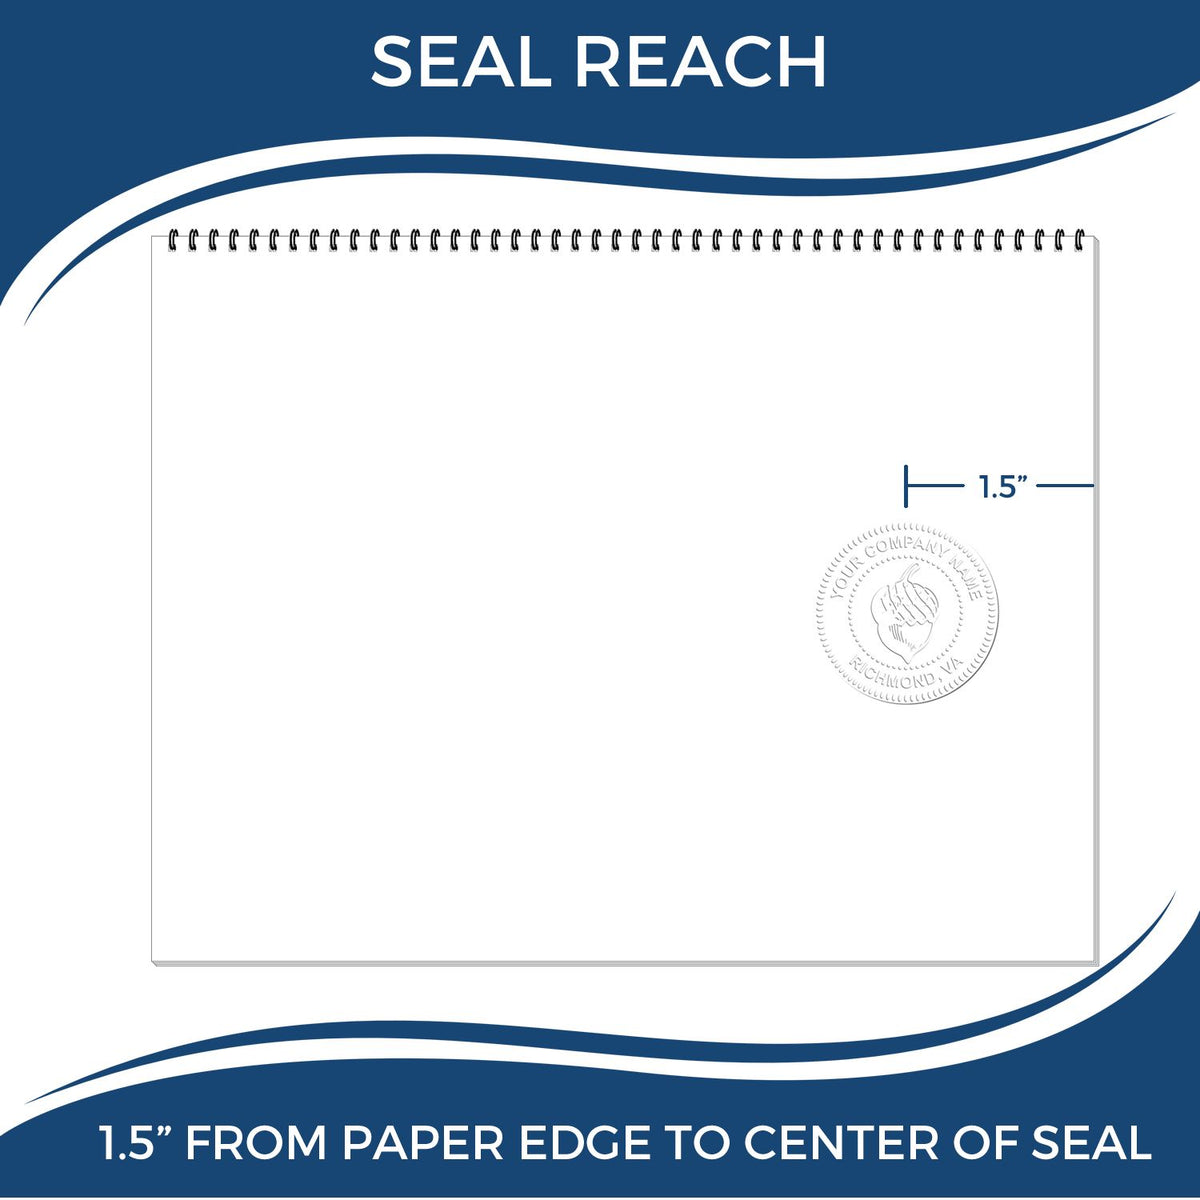 An infographic showing the seal reach which is represented by a ruler and a miniature seal image of the Soft Delaware Professional Geologist Seal